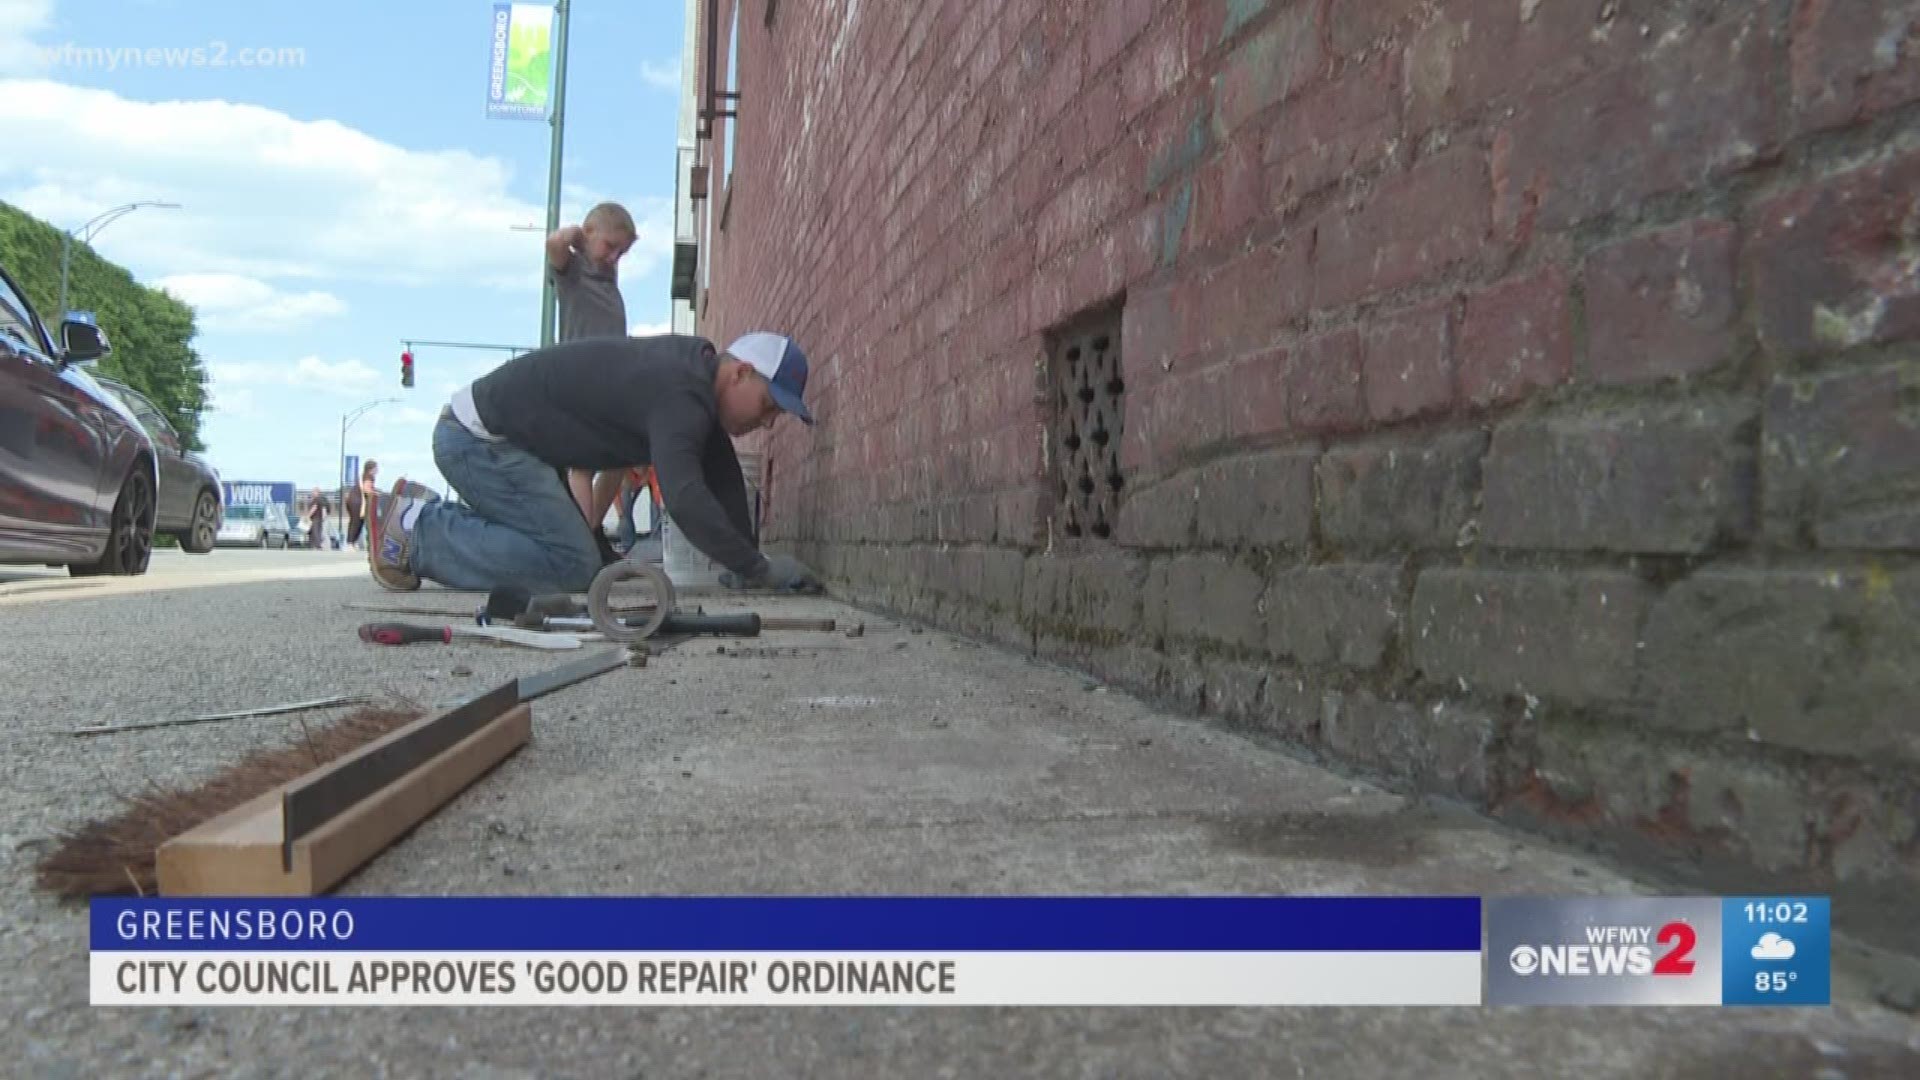 Owners of run-down buildings in Greensboro can now be fined if someone complains about it.